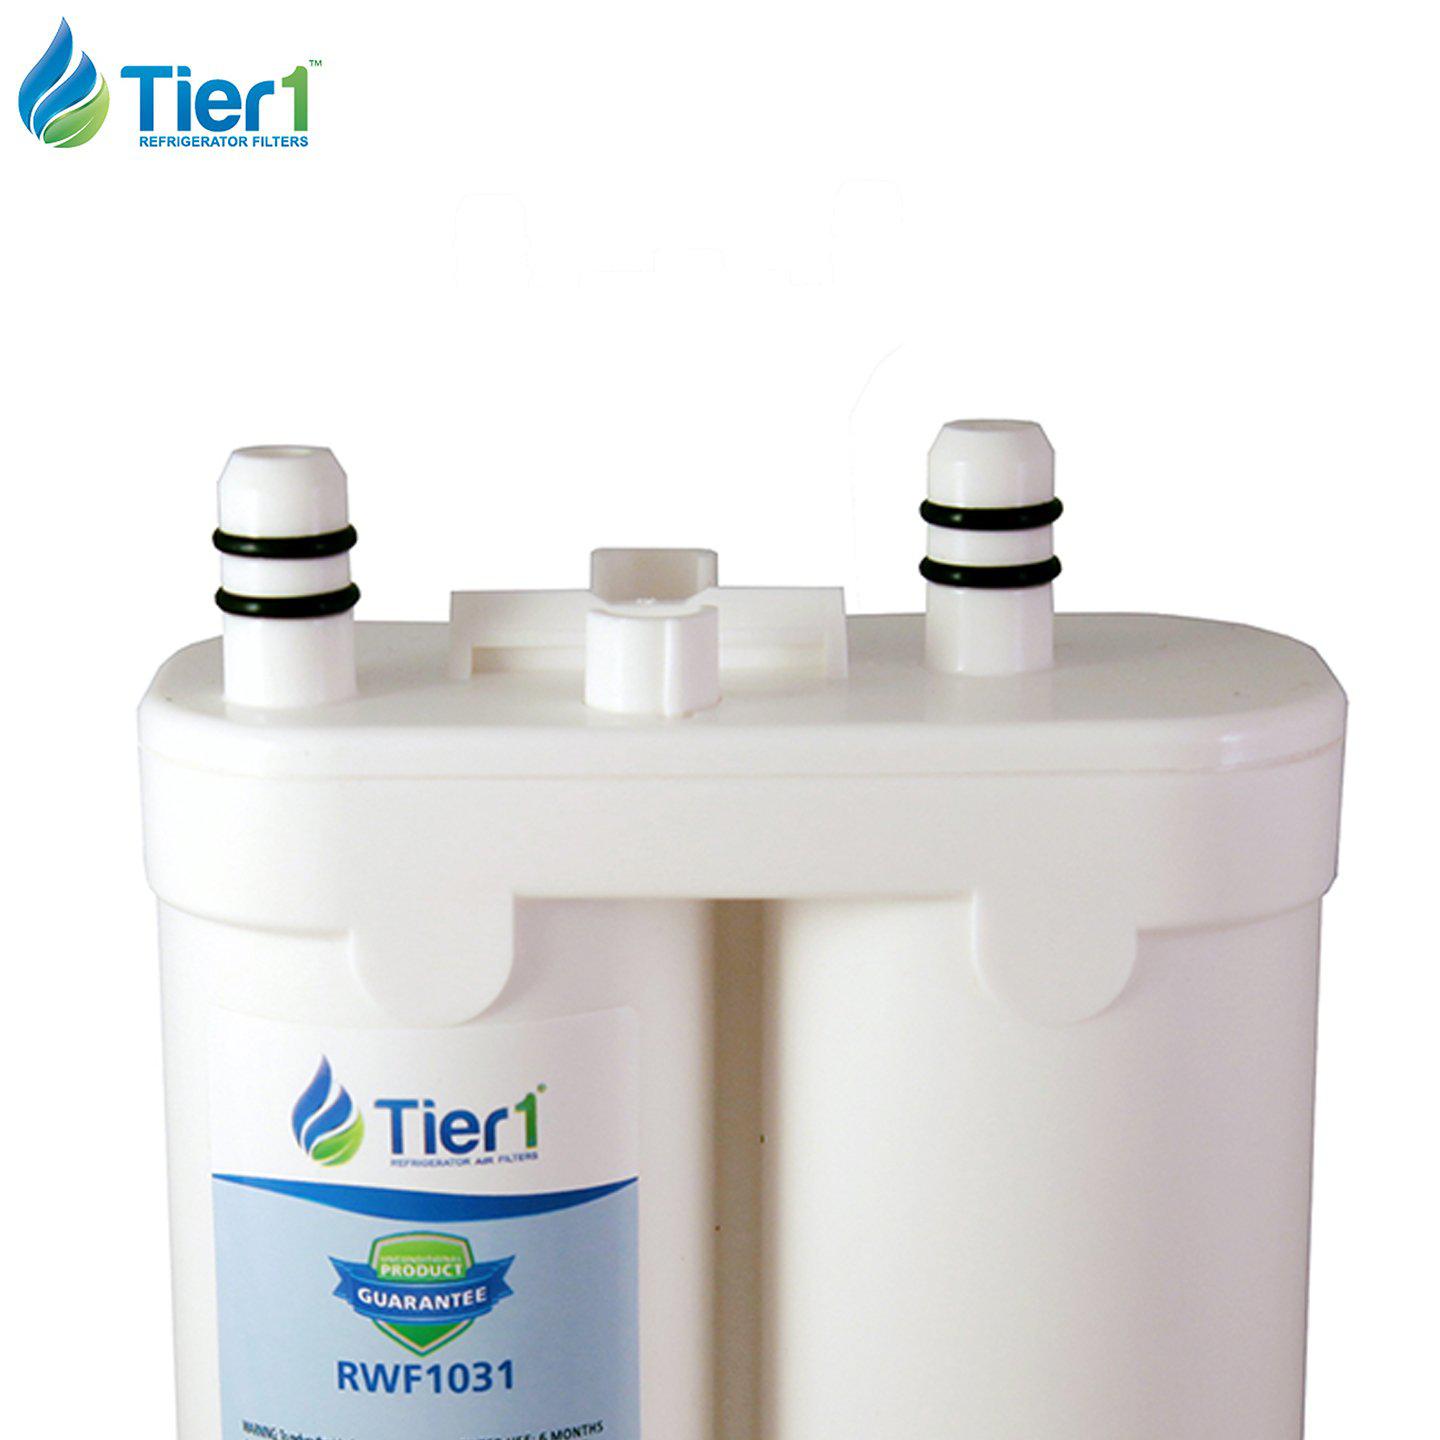 tier1 puresource2 refrigerator water filter 3-pk | replacement for wf2cb, ngfc 2000, 1004-42-fa, 469911, 469916, fc100, ewf2c